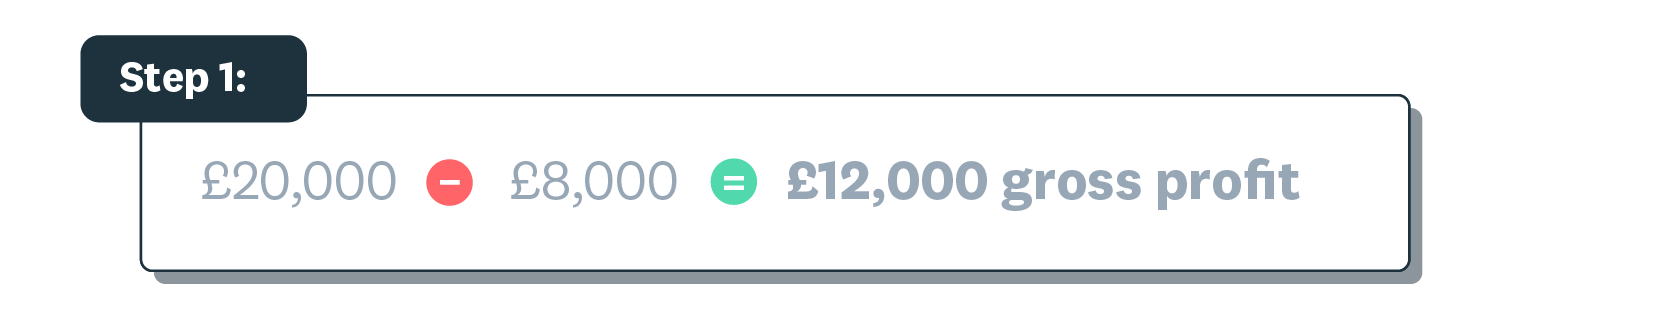 Step 1 example shows £20,000 minus £8,000 equals £12,000 gross profit.